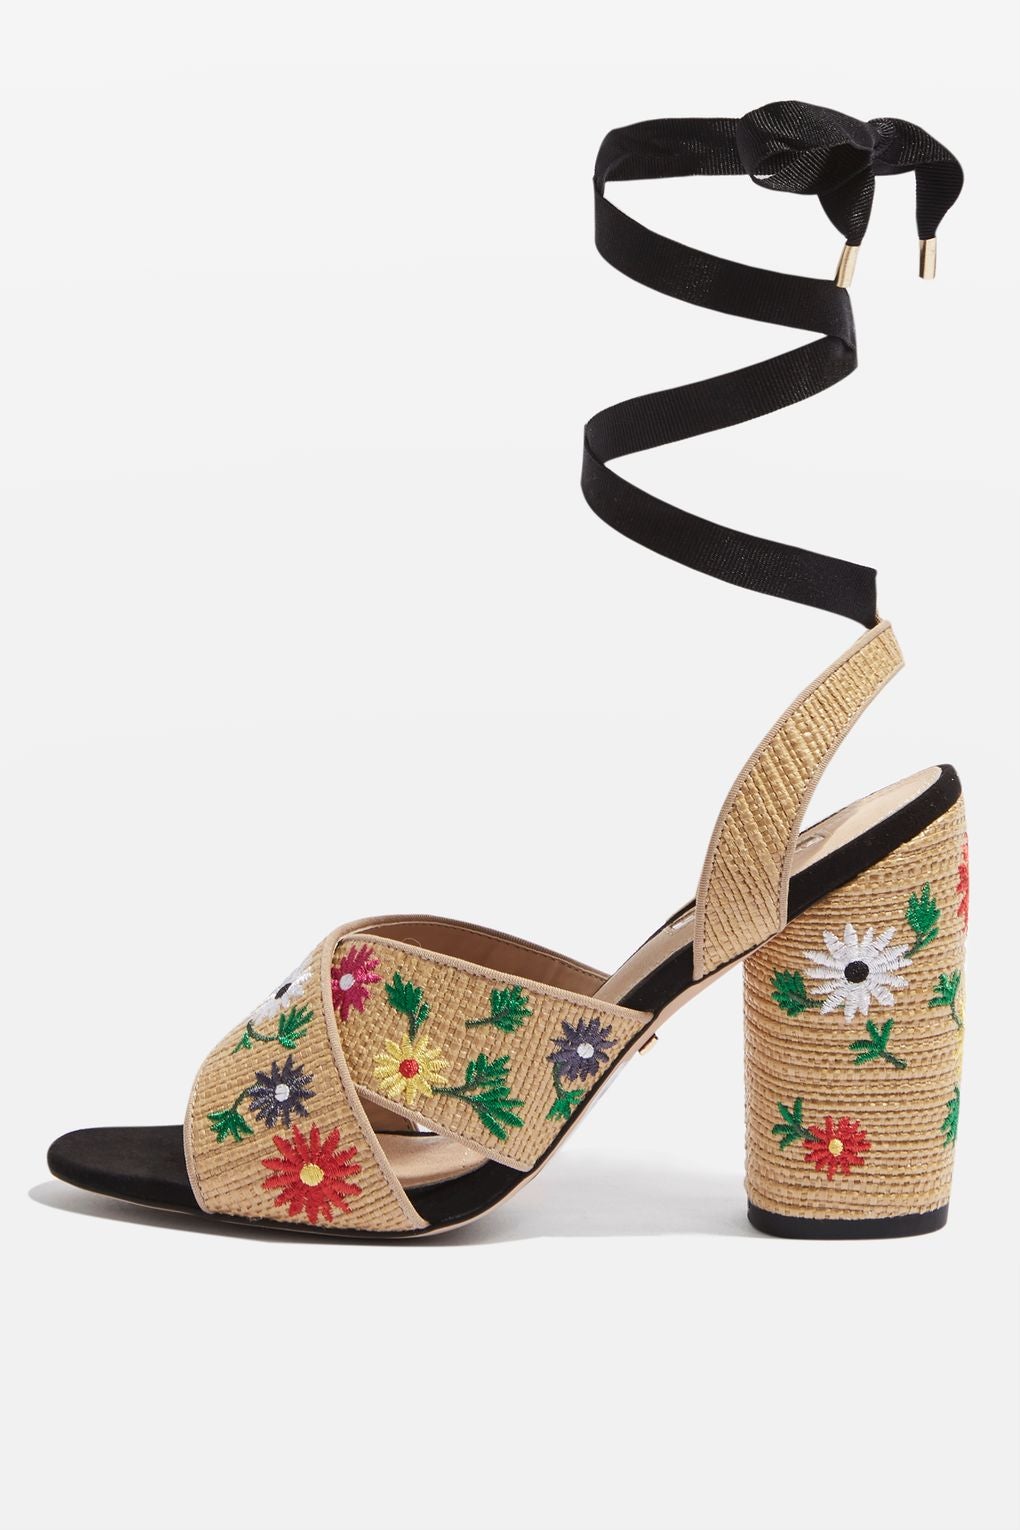 Festive Feet! 10 Fun Shoes Under $100 That’ll Help You Boldy Step Into June